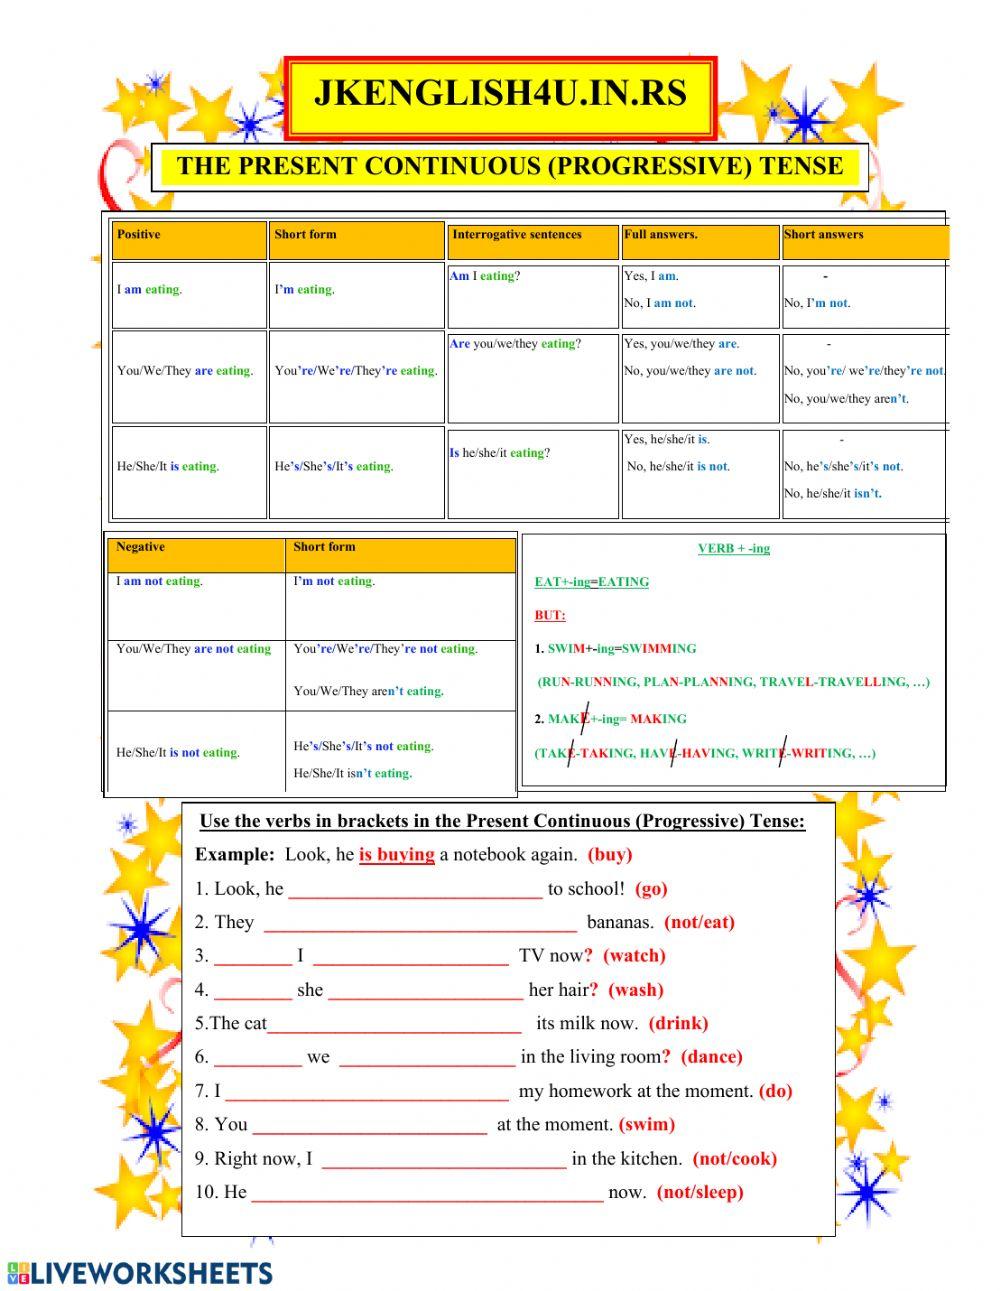 Present Continuous (Progressive) Tense, forms and exercise